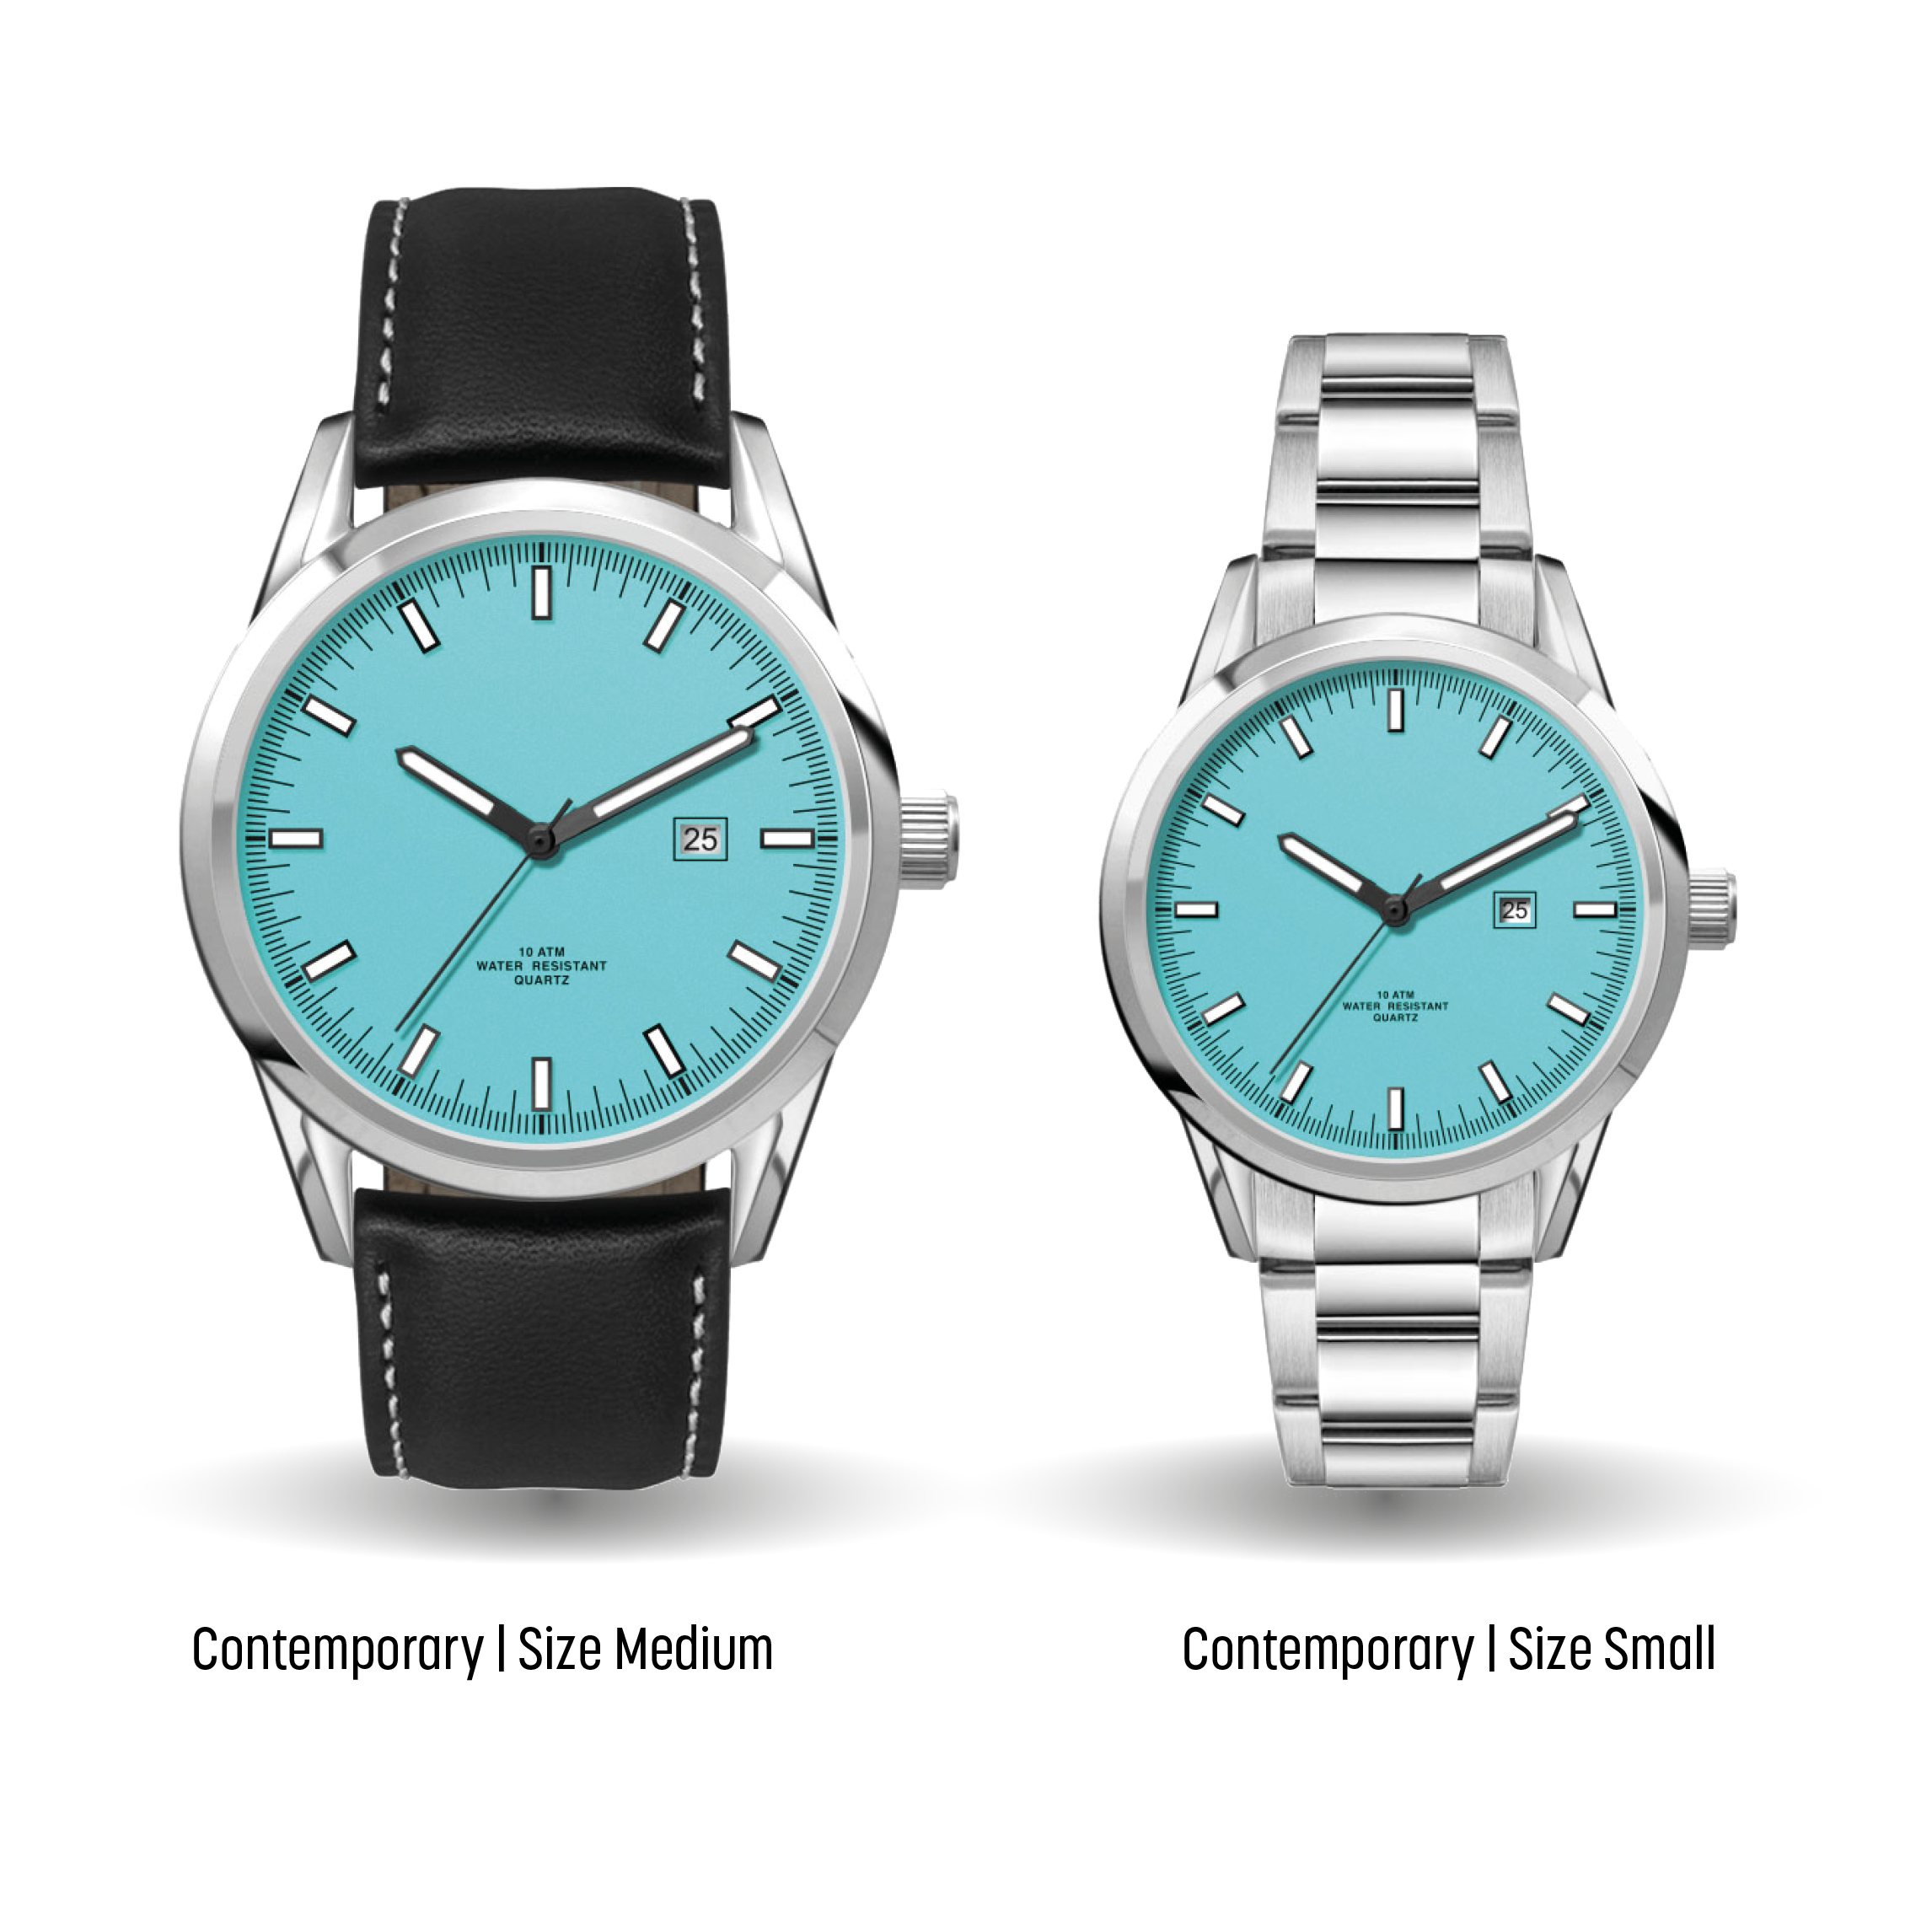 Custom 'CONTEMPORARY' watches by Watch Branding for corporate gifts, history celebrations or unique branded merchandise